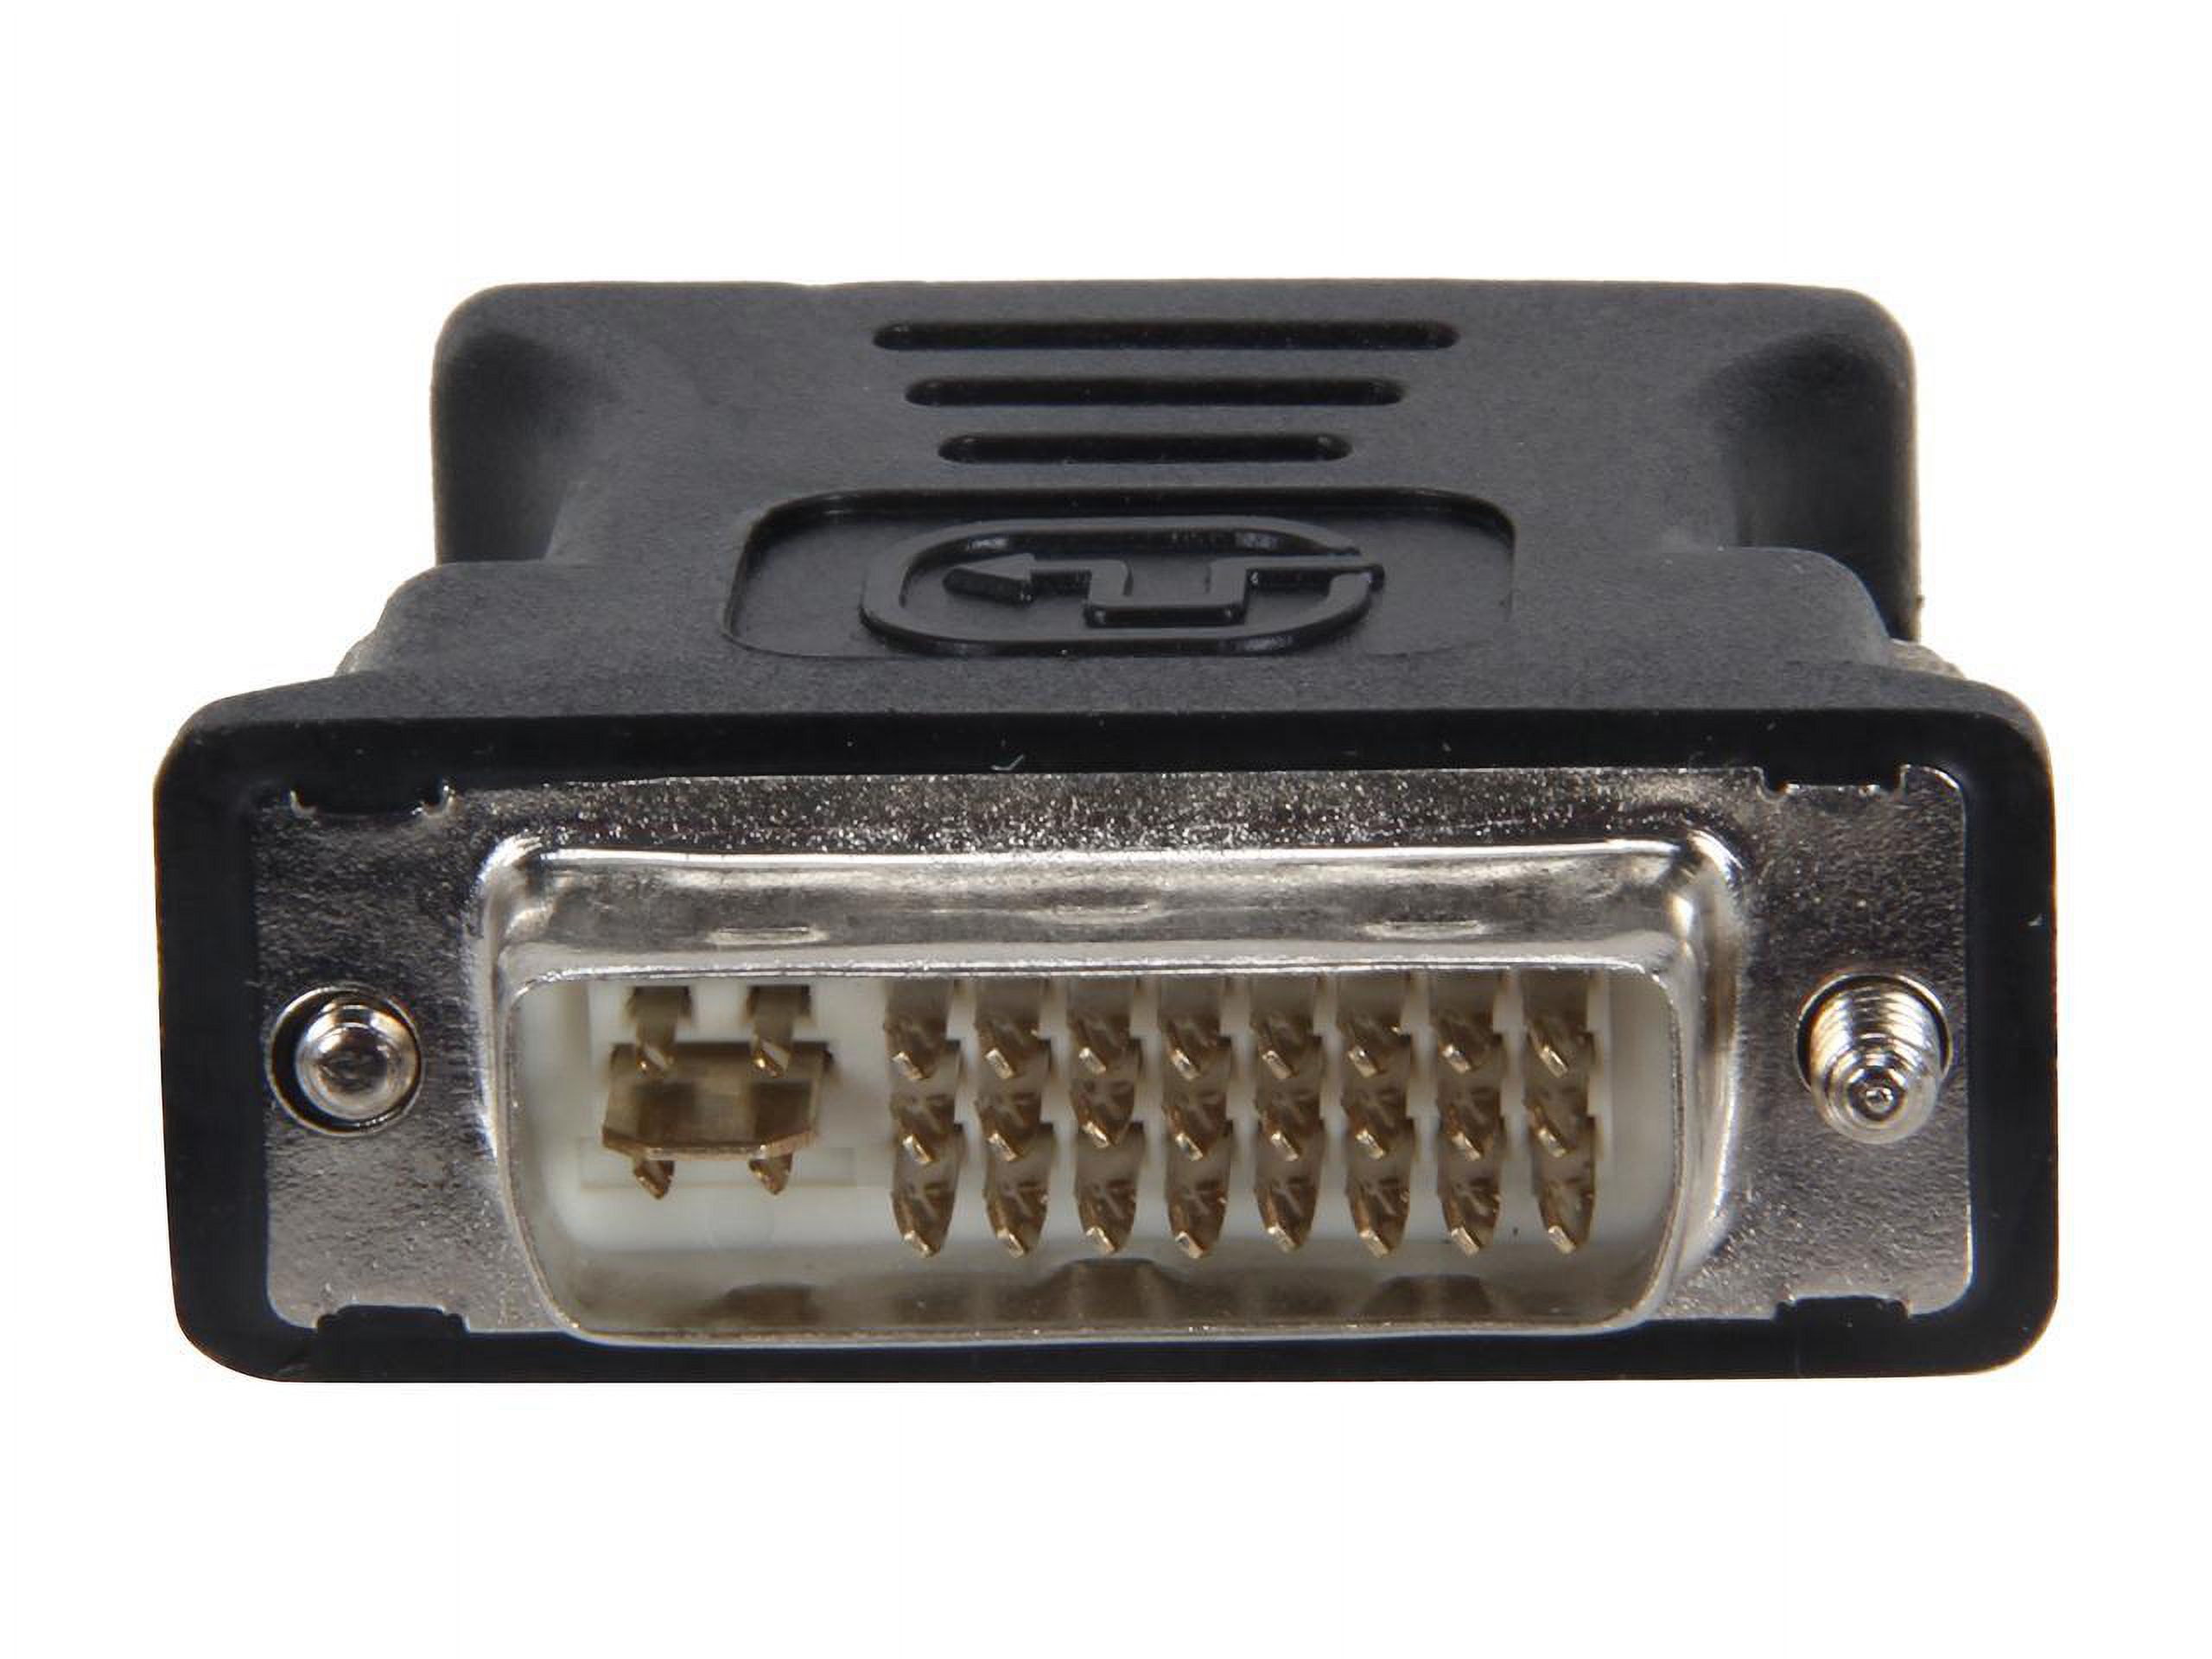 StarTech DVI to VGA Cable Adapter, Black - image 2 of 4